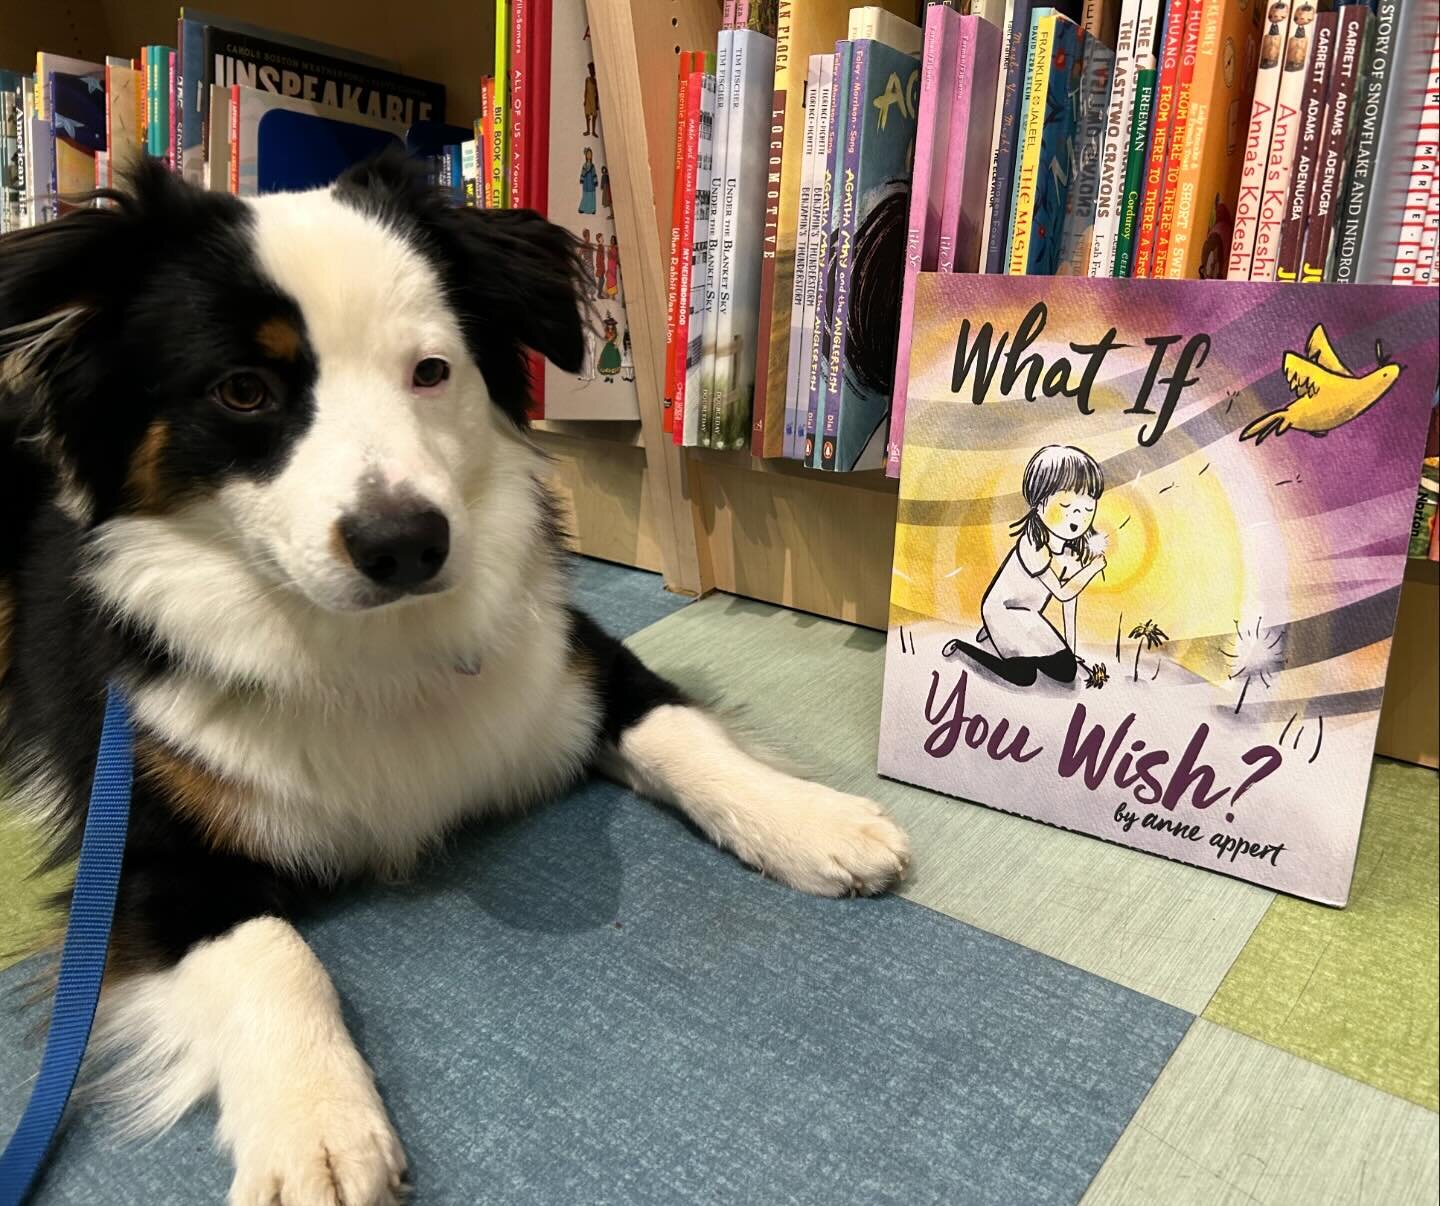 Look what Paddington and I found at @porter_square_books !! Happy book birthday, @anneappertillustration! WHAT IF YOU WISH? Is so beautiful and carries such a resonant message of wonder and hope and good things for the future as long as we don&rsquo;